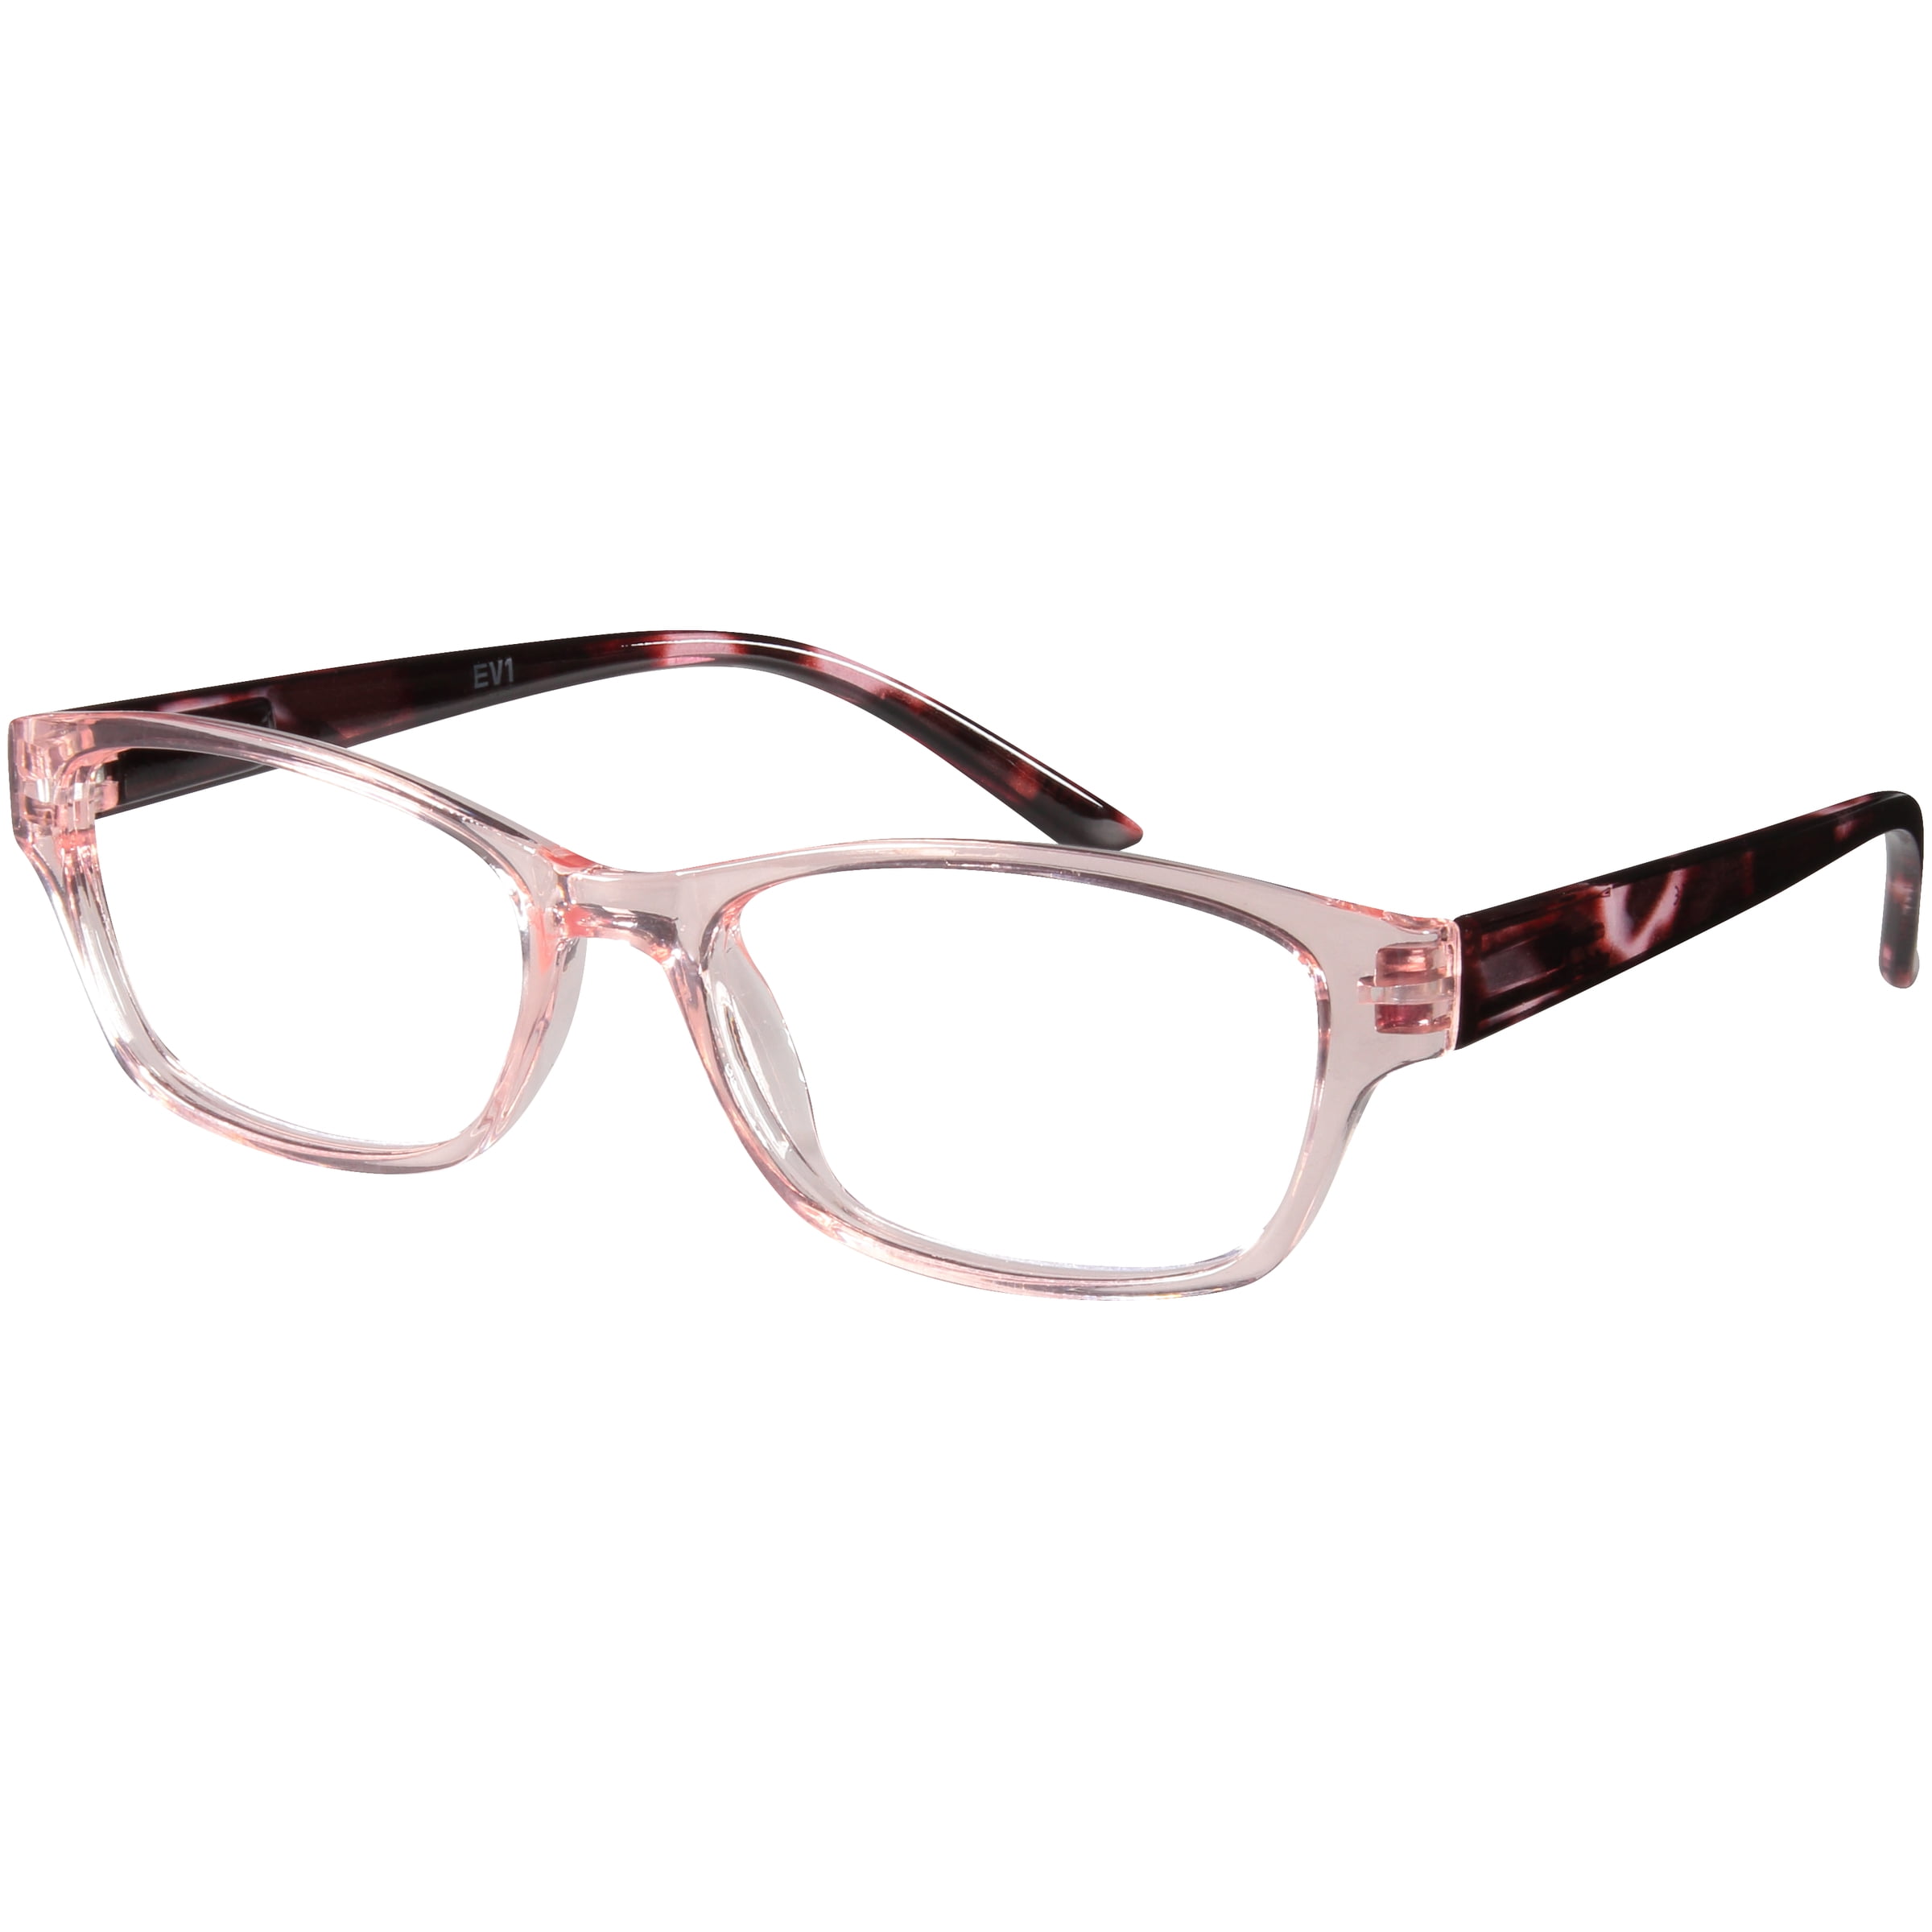 EV1 Dolly Crystal Pink +2.00 Reading Glasses with Case